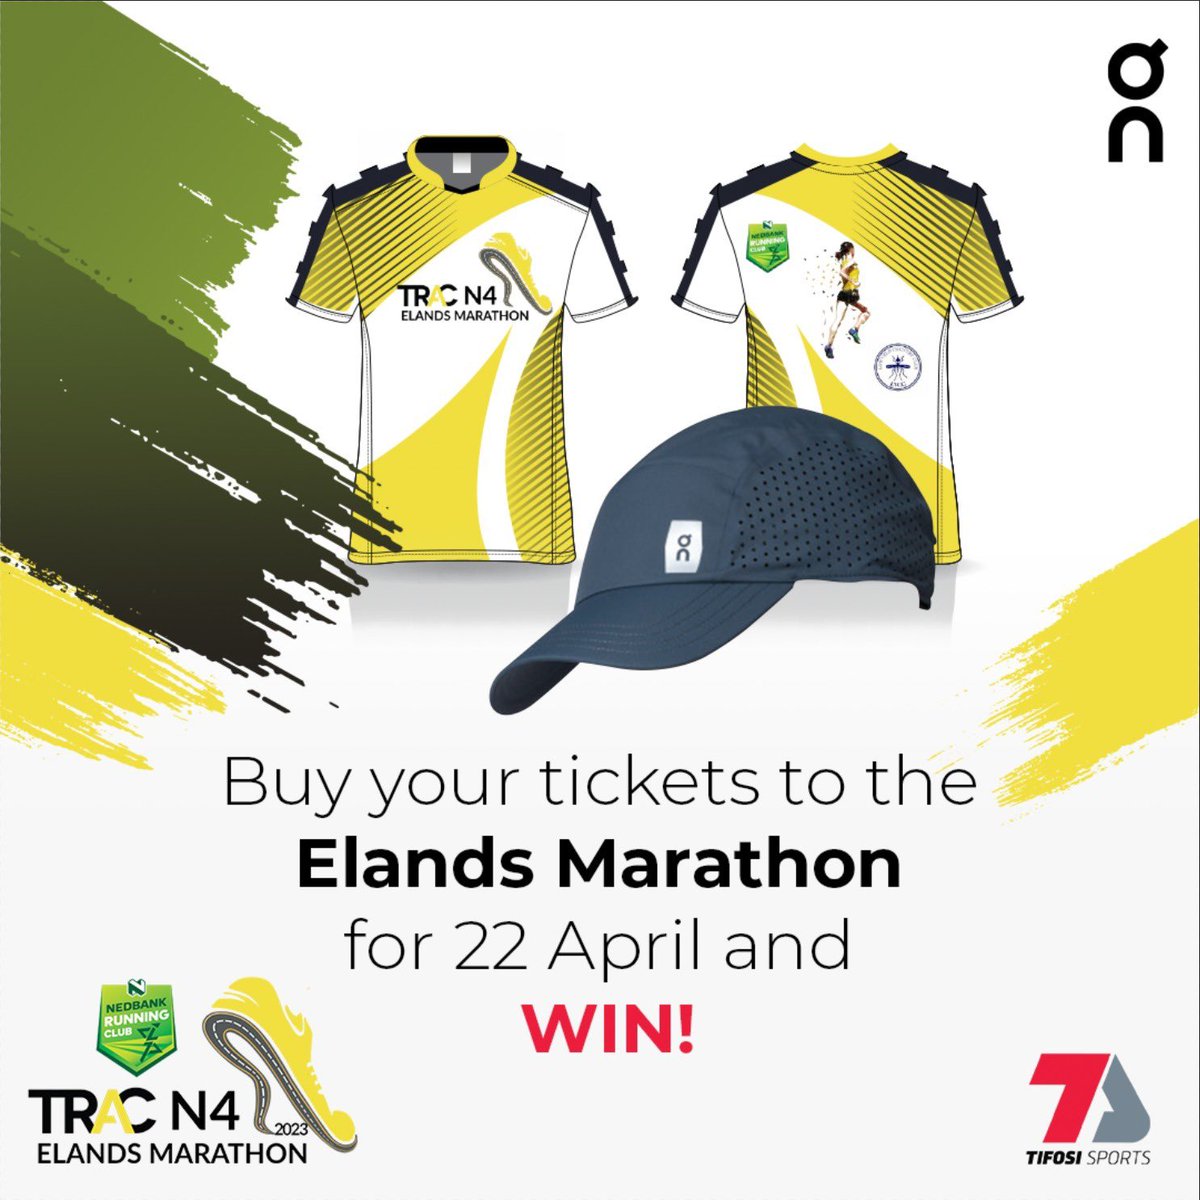 New week, new goals, don’t forget to save yourself some money & win great prices when you enter Mpumalanga’s fastest and most scenic @ComradesRace qualifier. #TracN4ElandsMarathon #OnRunningSA #AlwaysOn #RunOnClouds #ForgetGravity @ThirstiW @Nedbank_RC @TRACN4route @TifosiSports